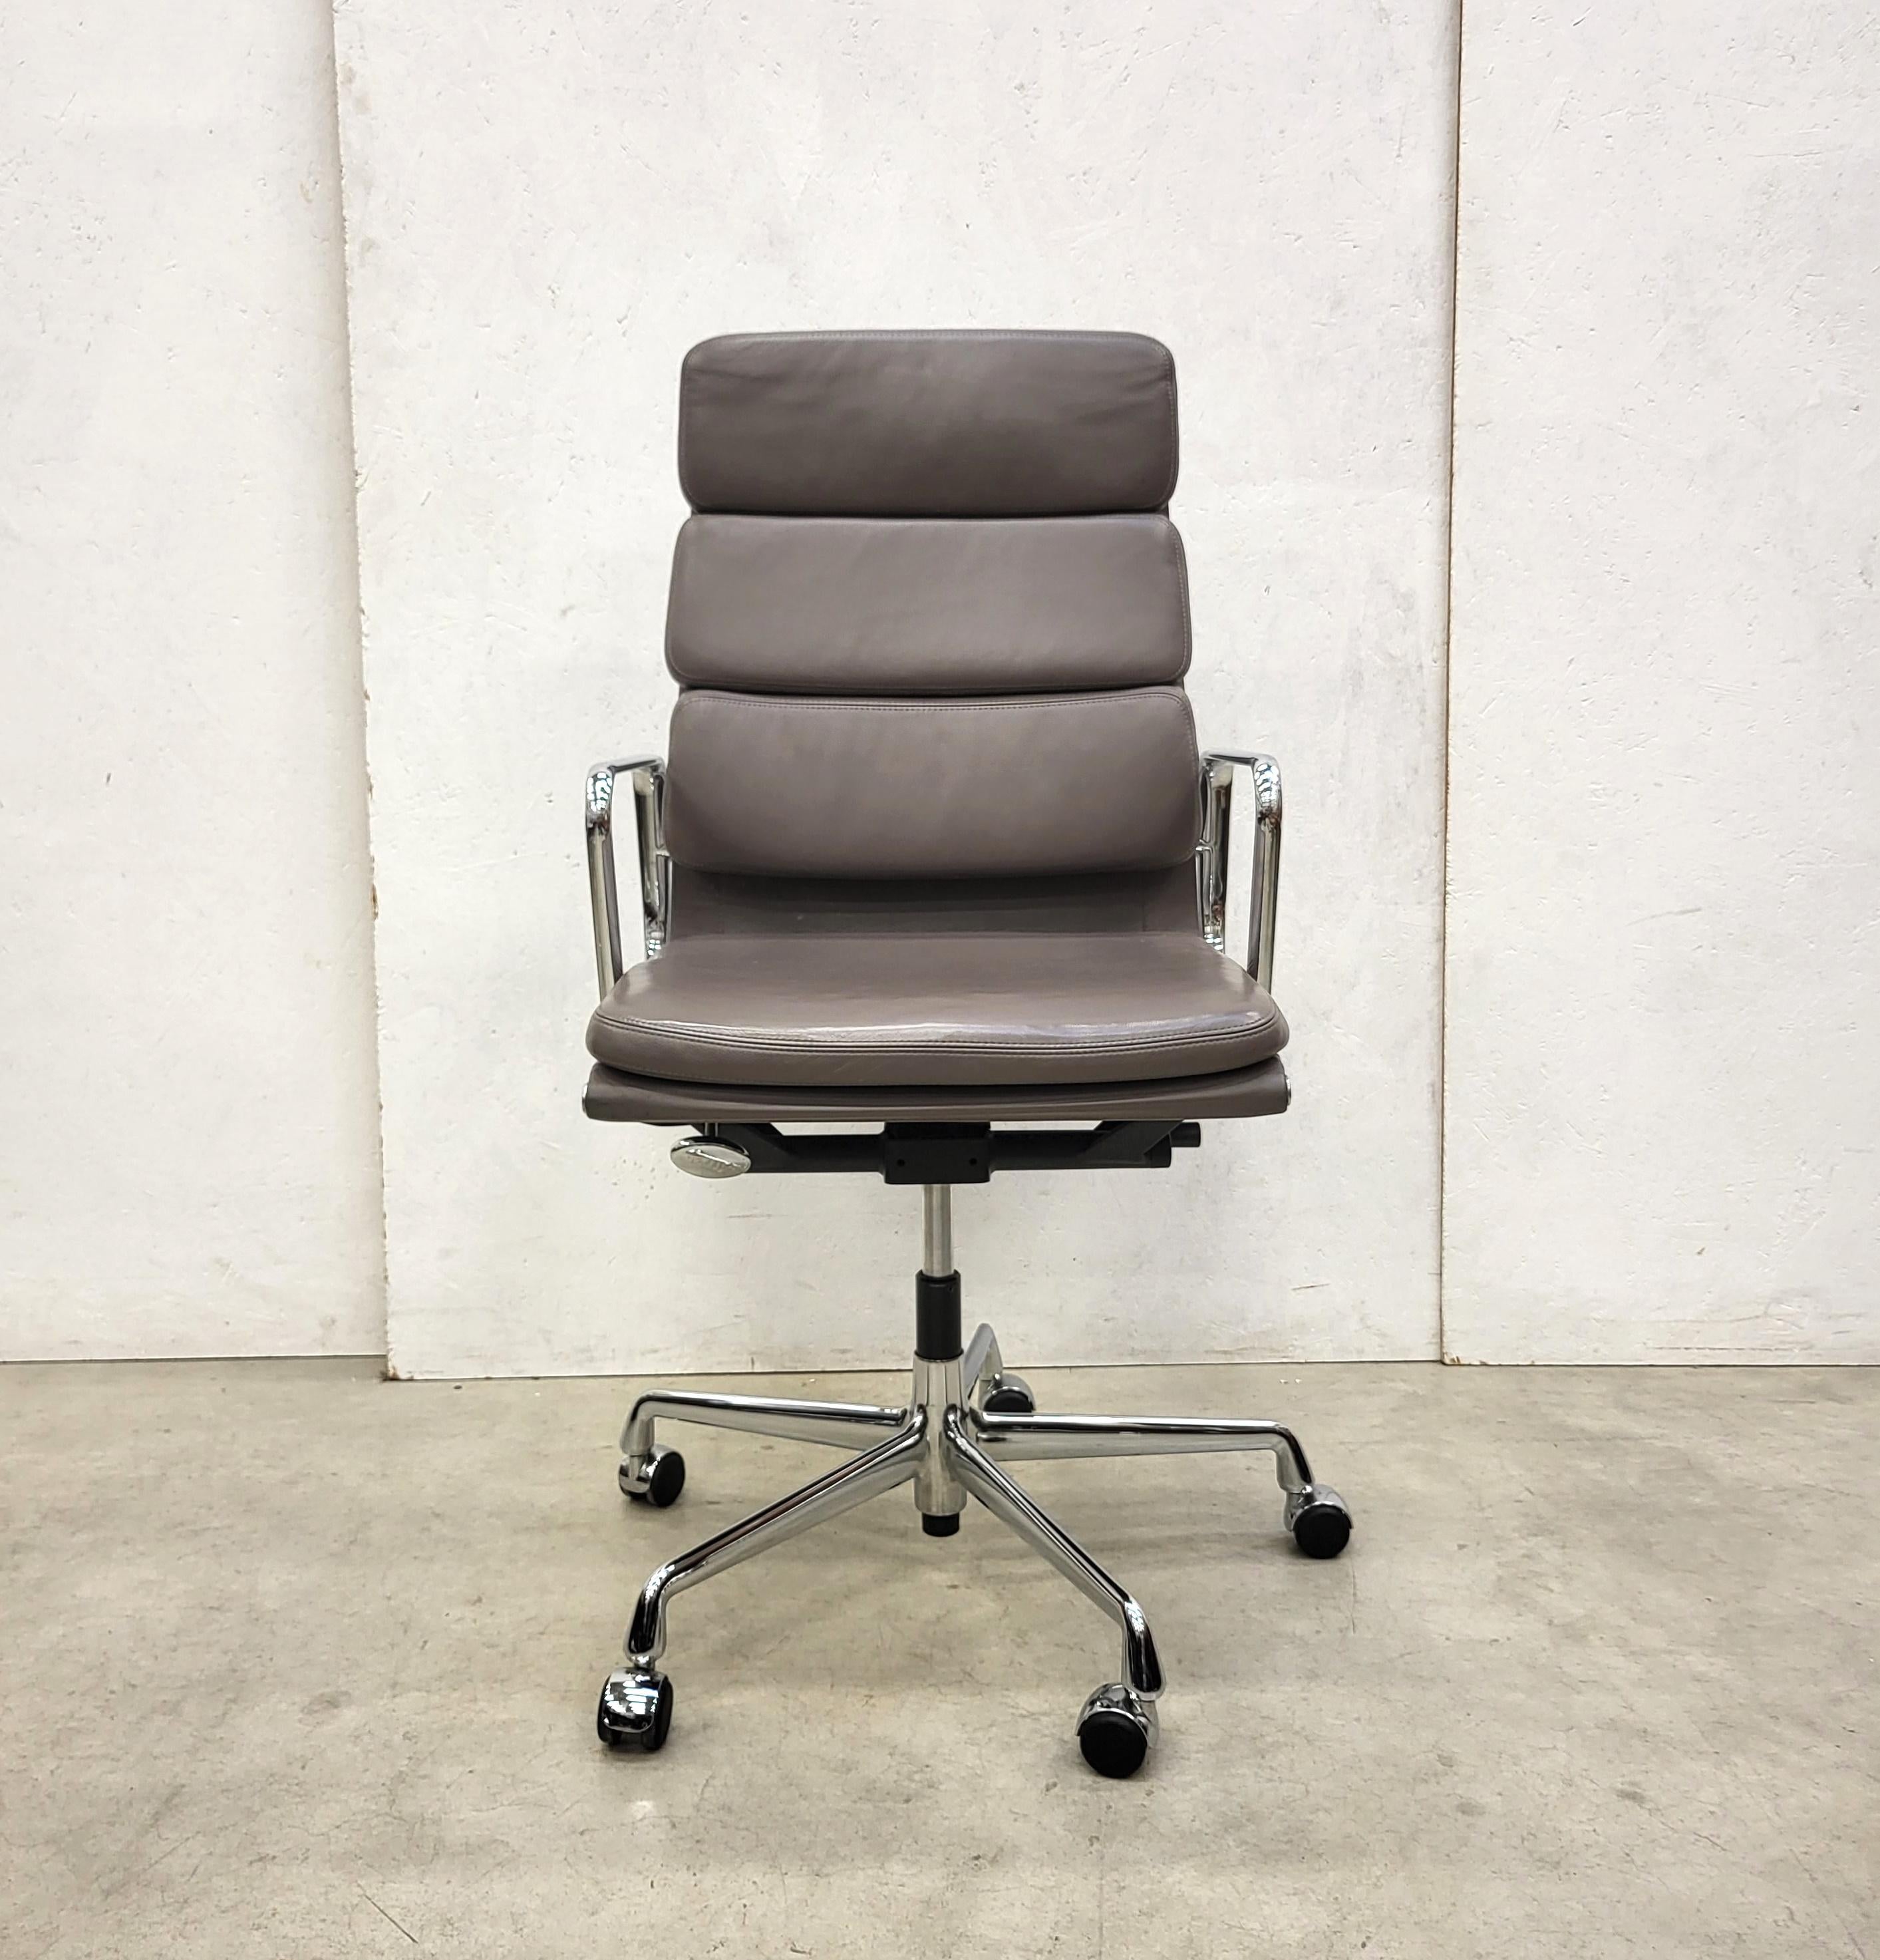 Very nice soft pad office chair model EA219 produced by Vitra. 
The chair features a chromed aluminium frame and was made in 2012.

The chair is height adjustable and has a tilt mechanism both of which are working very smoothly.

It has a wonderful